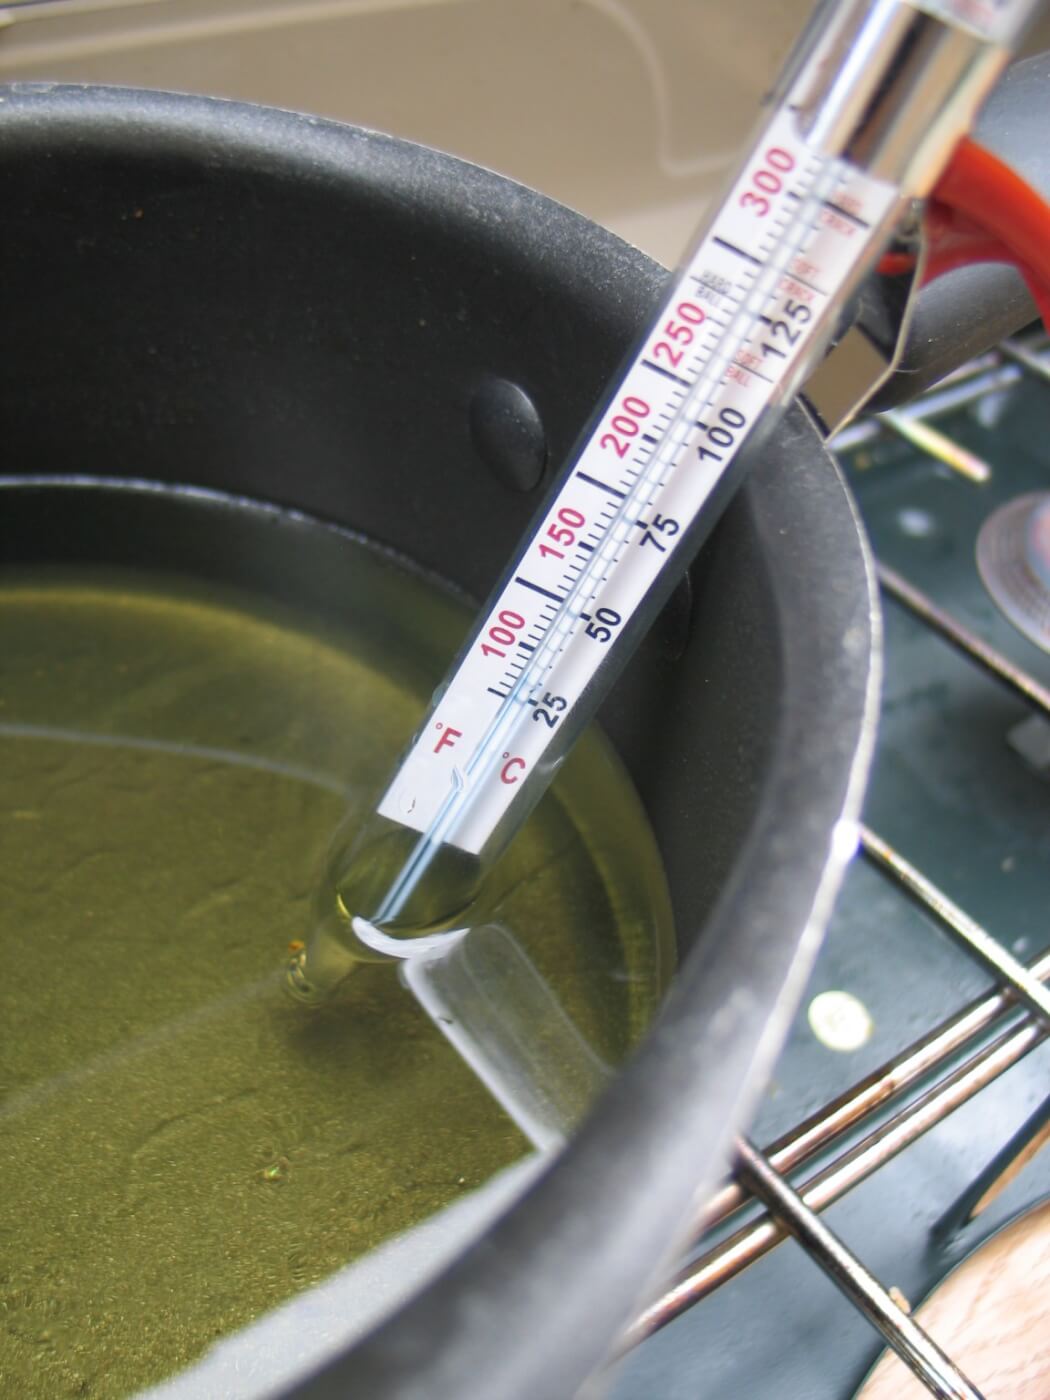 2. Using a candy thermometer is a good way to maintain proper temperature control as it can be suspended by the side of the pot so it measures the liquid and not the bottom of the pot. 